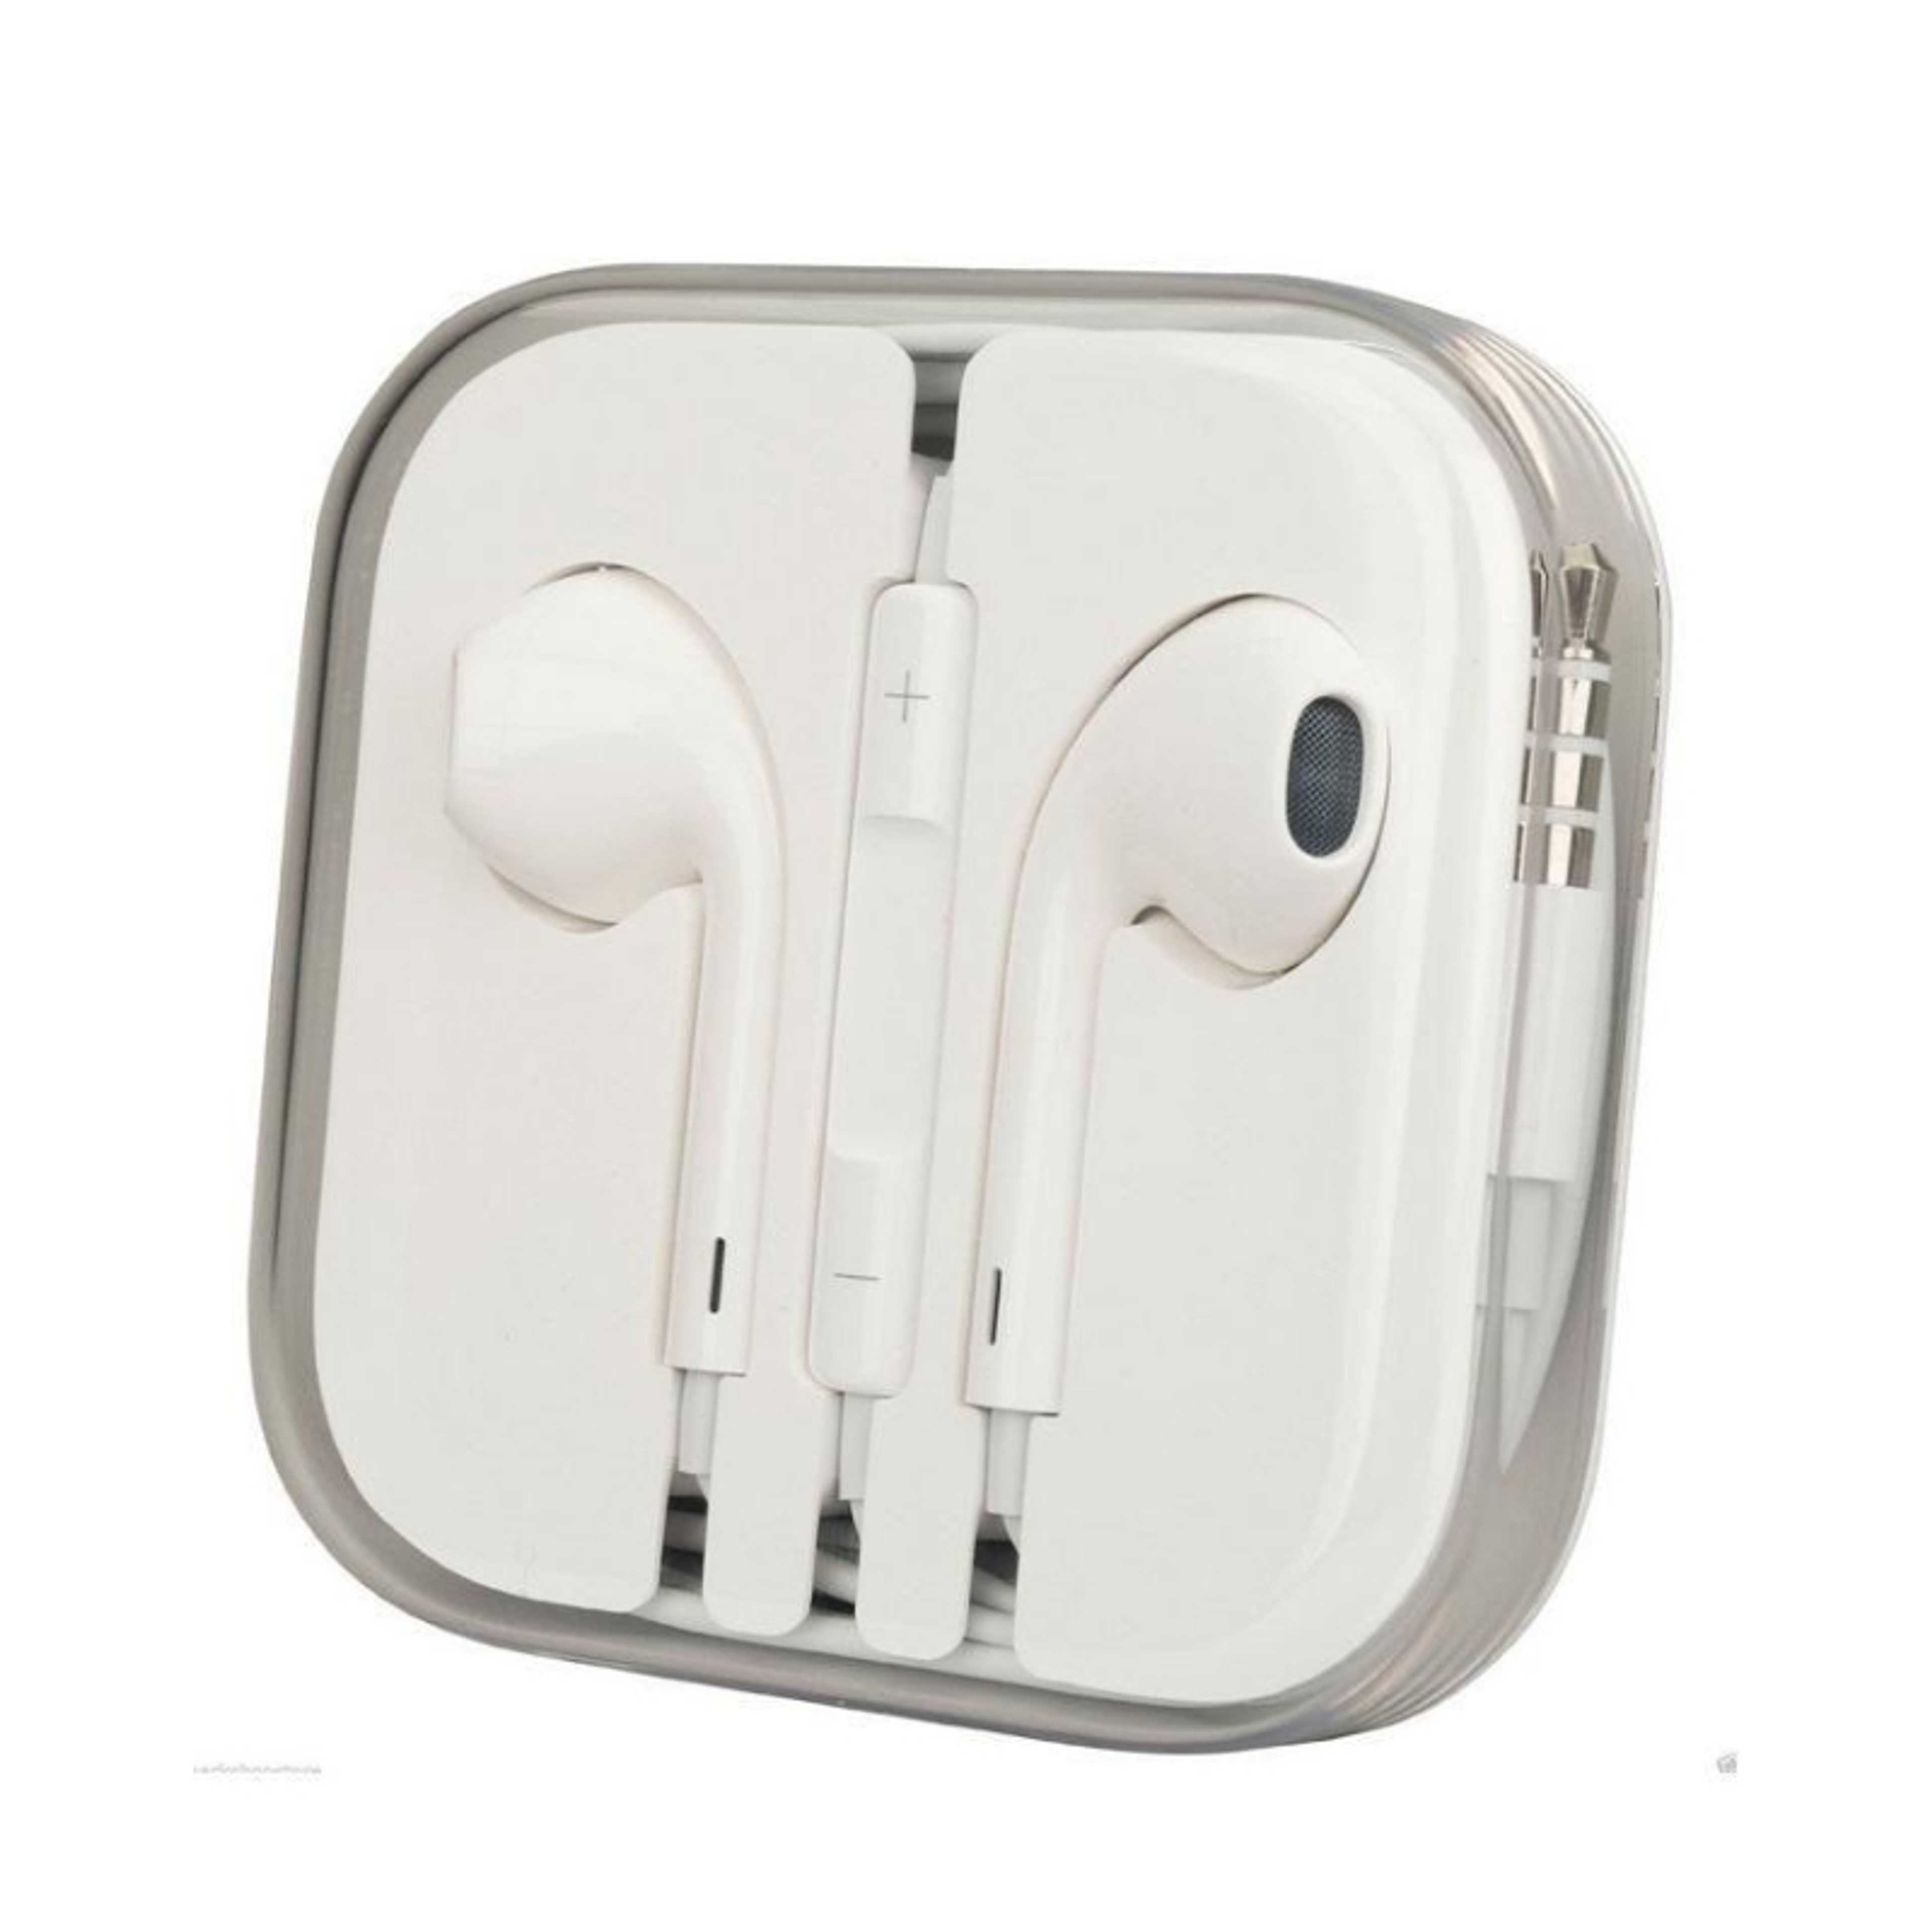 Earphones Handsfree for Everyone - White (New Arrival)